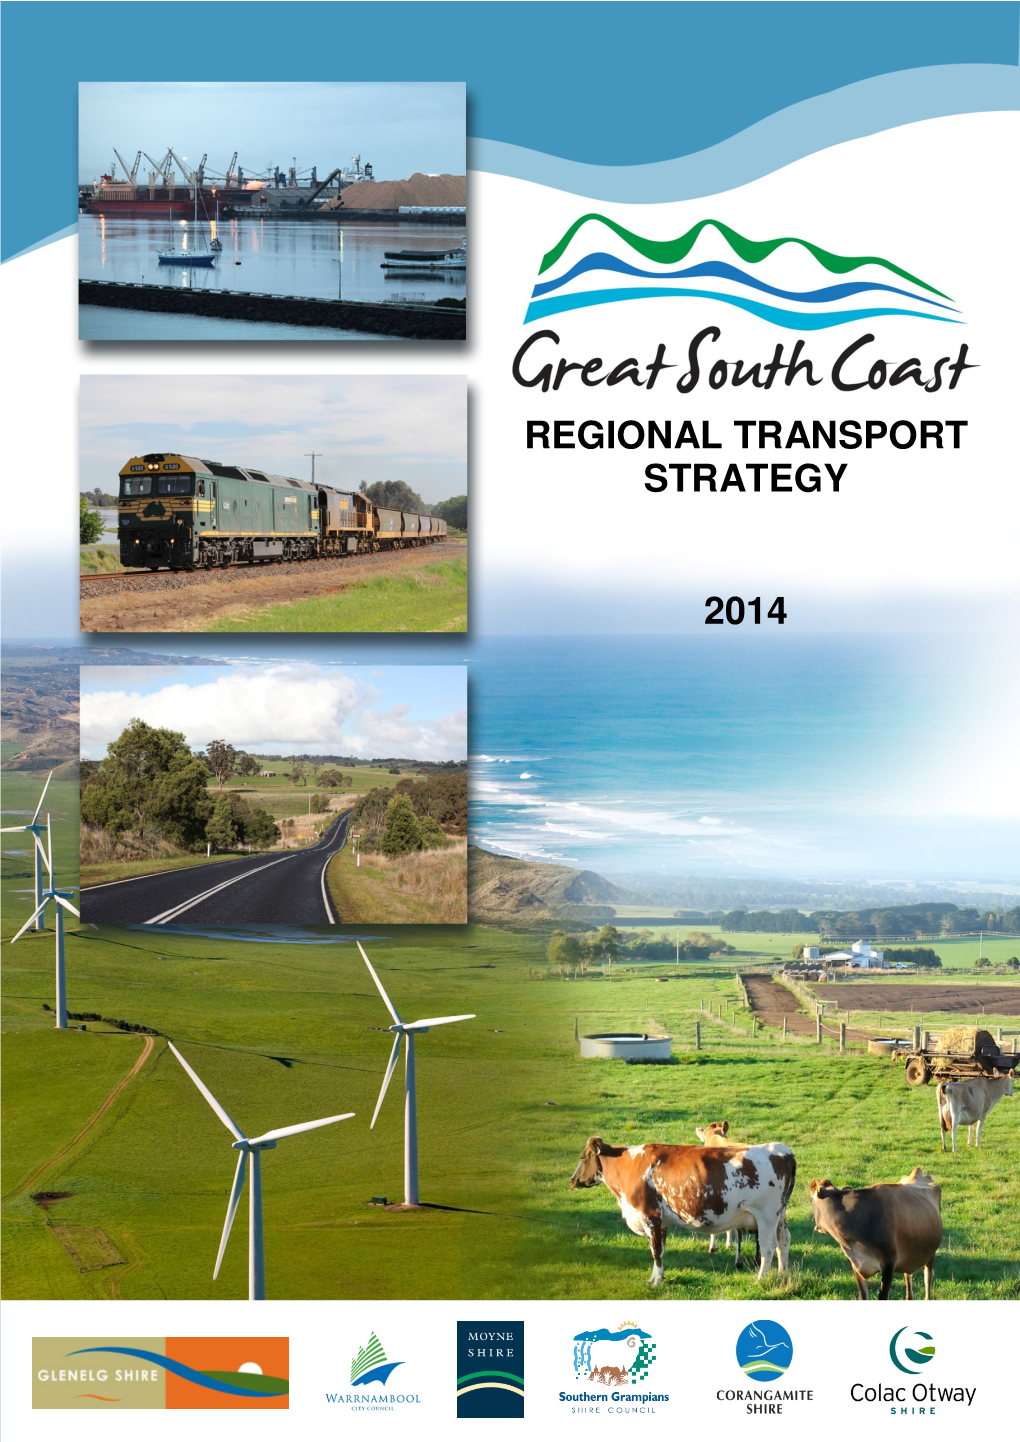 Great South Coast Regional Transport Strategy Falls Under the Connectivity Section of This Greater Plan; Strategy Two: Improve Our Connections